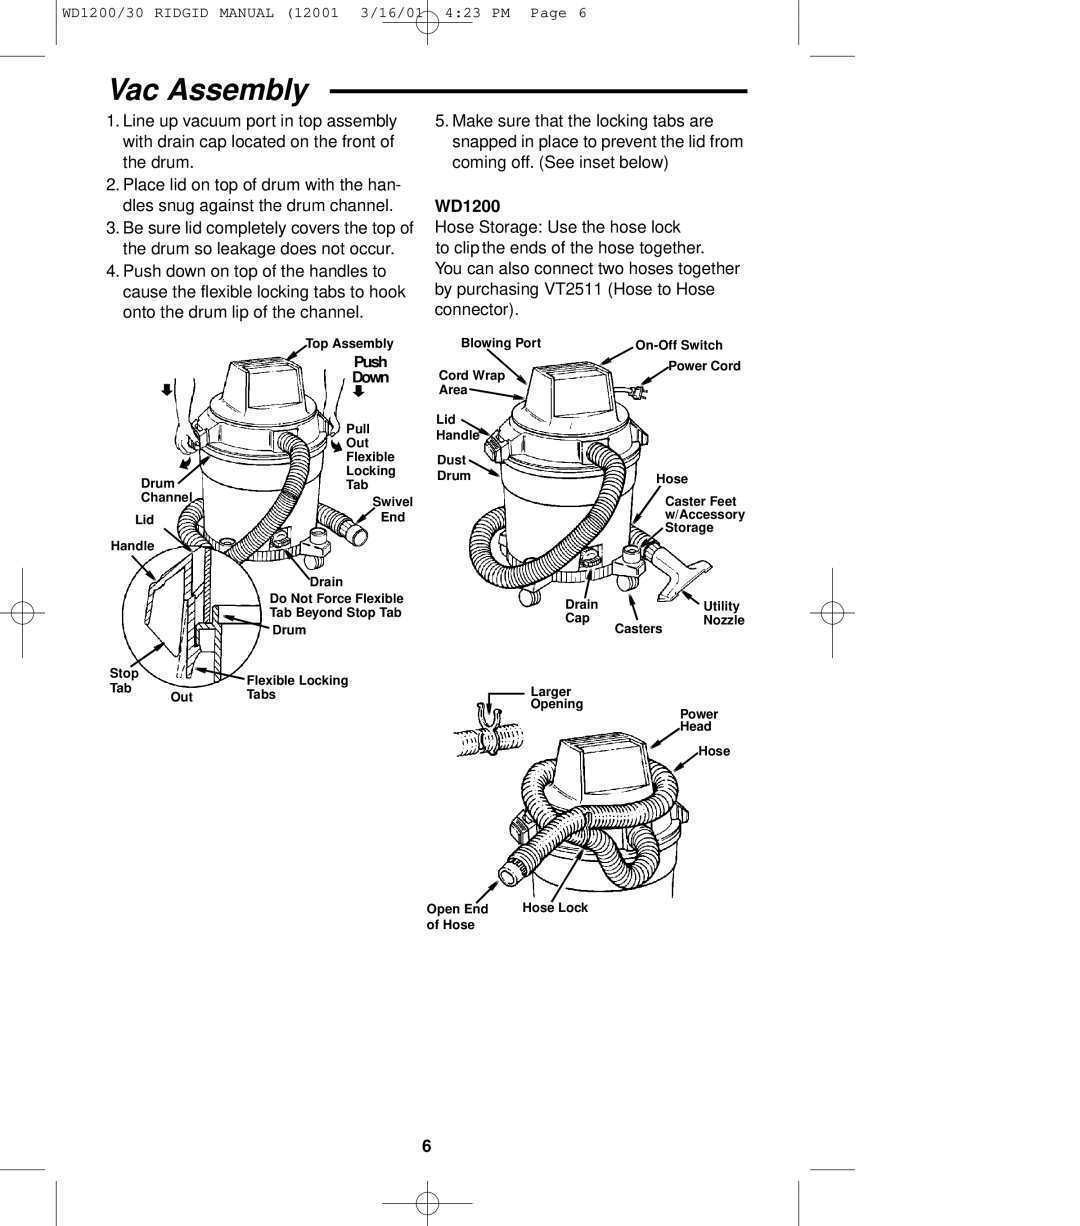 RIDGID WD1230 owner manual Vac Assembly, WD1200 